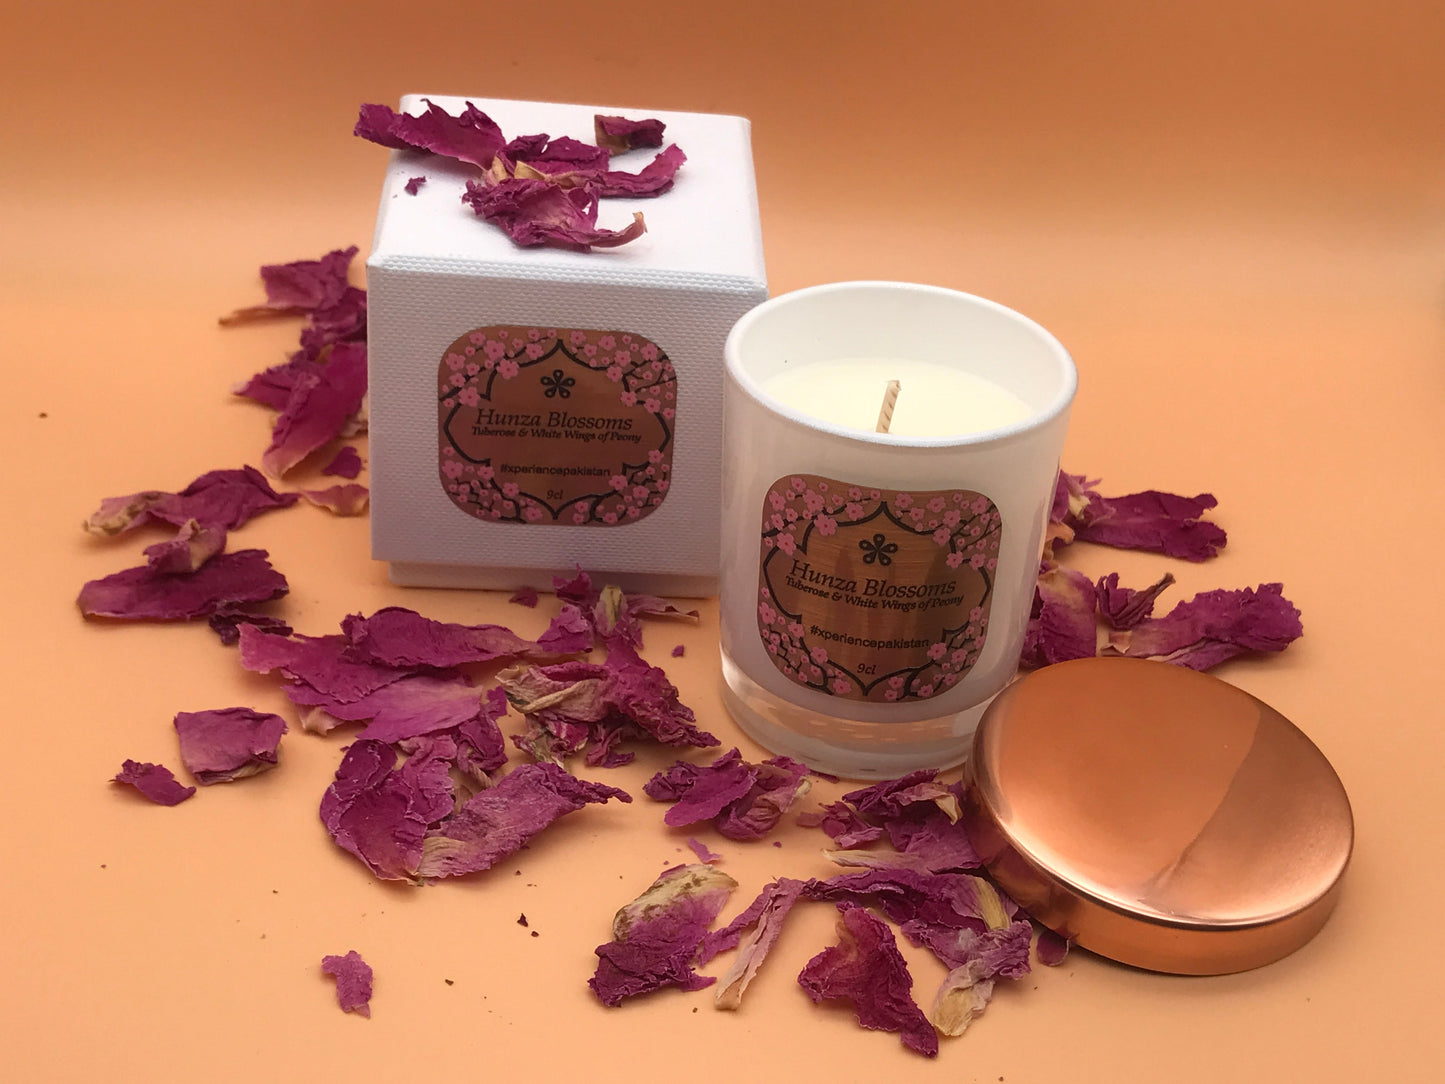 Hunza Blossoms Scented Candles Xperience Pakistan Lifestyle